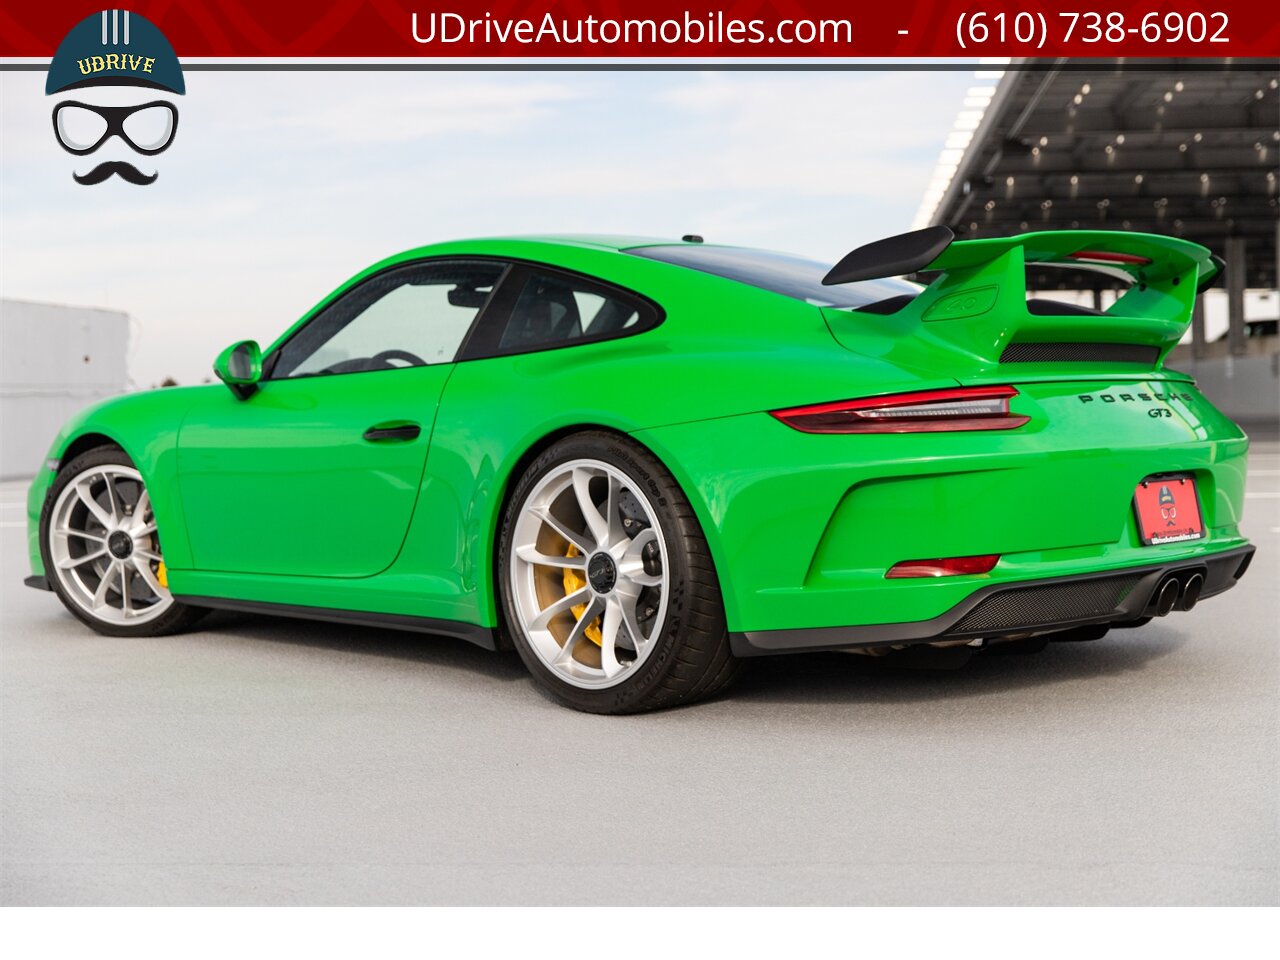 2018 Porsche 911 GT3 6 Speed Paint To Sample Viper Green 48 Miles  Front Axle Lift PCCB Carbon Bucket Seats - Photo 5 - West Chester, PA 19382